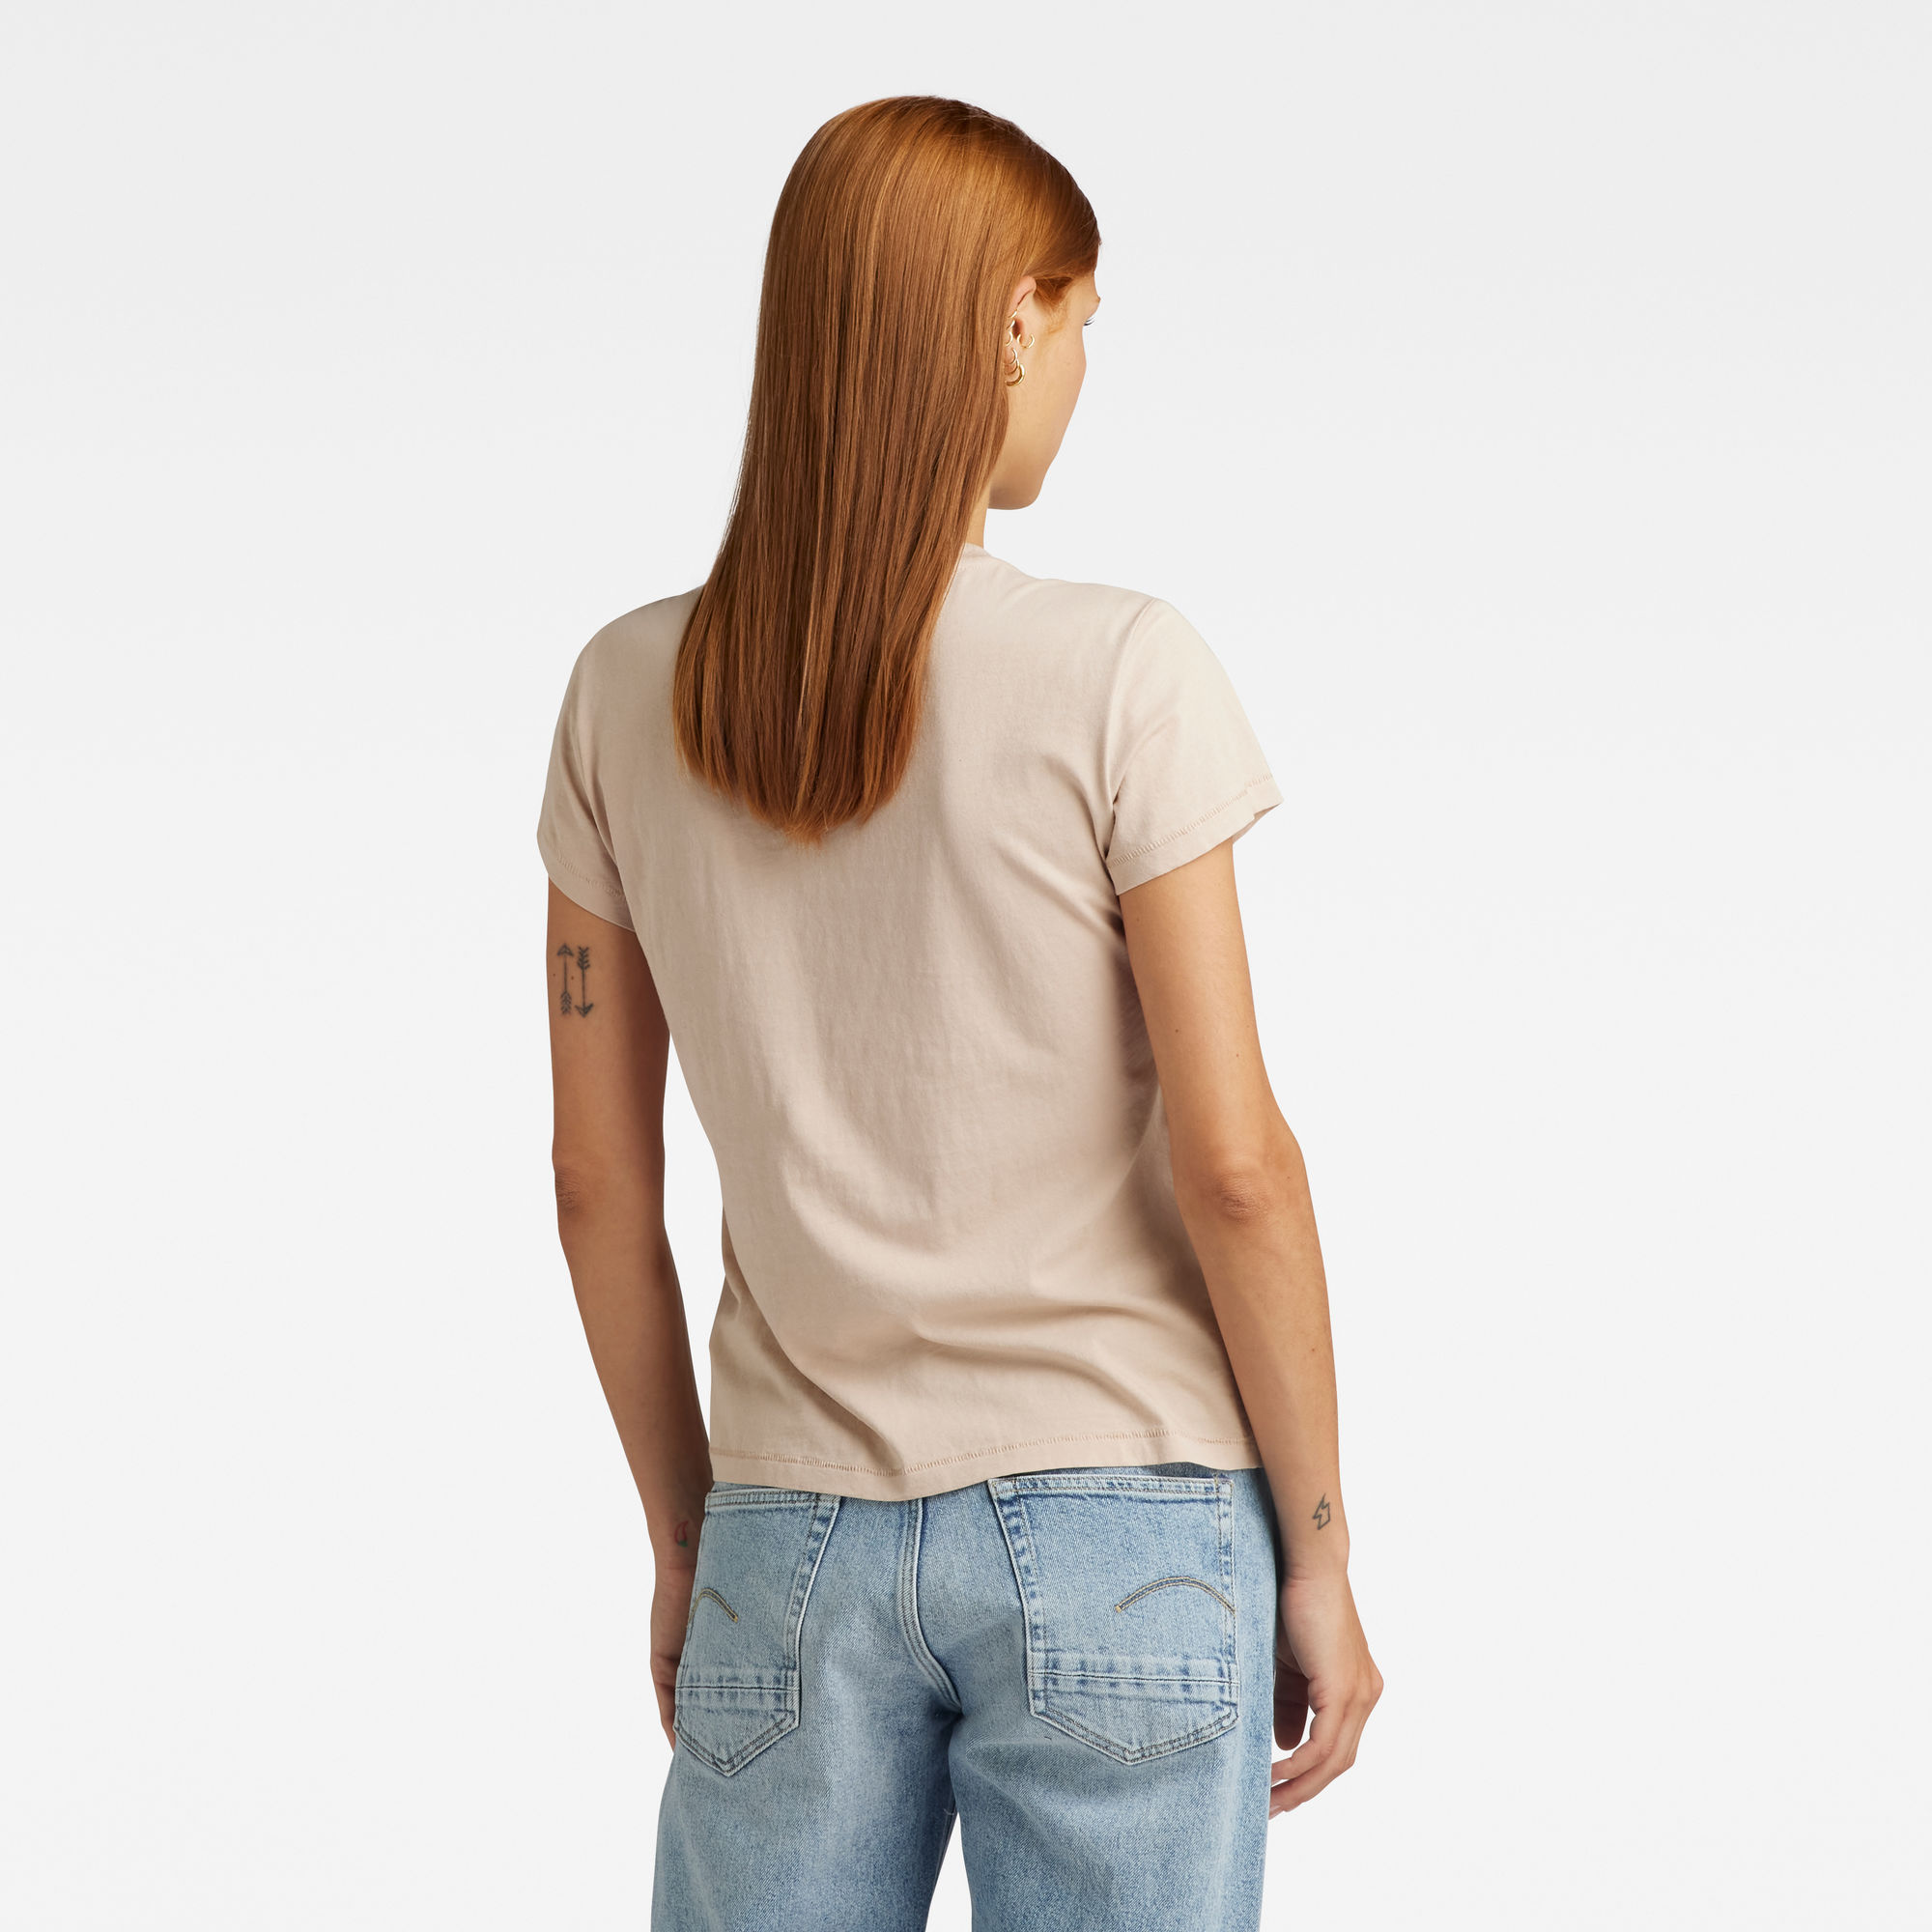 G-Star RAW Front Seam Top Roze Dames